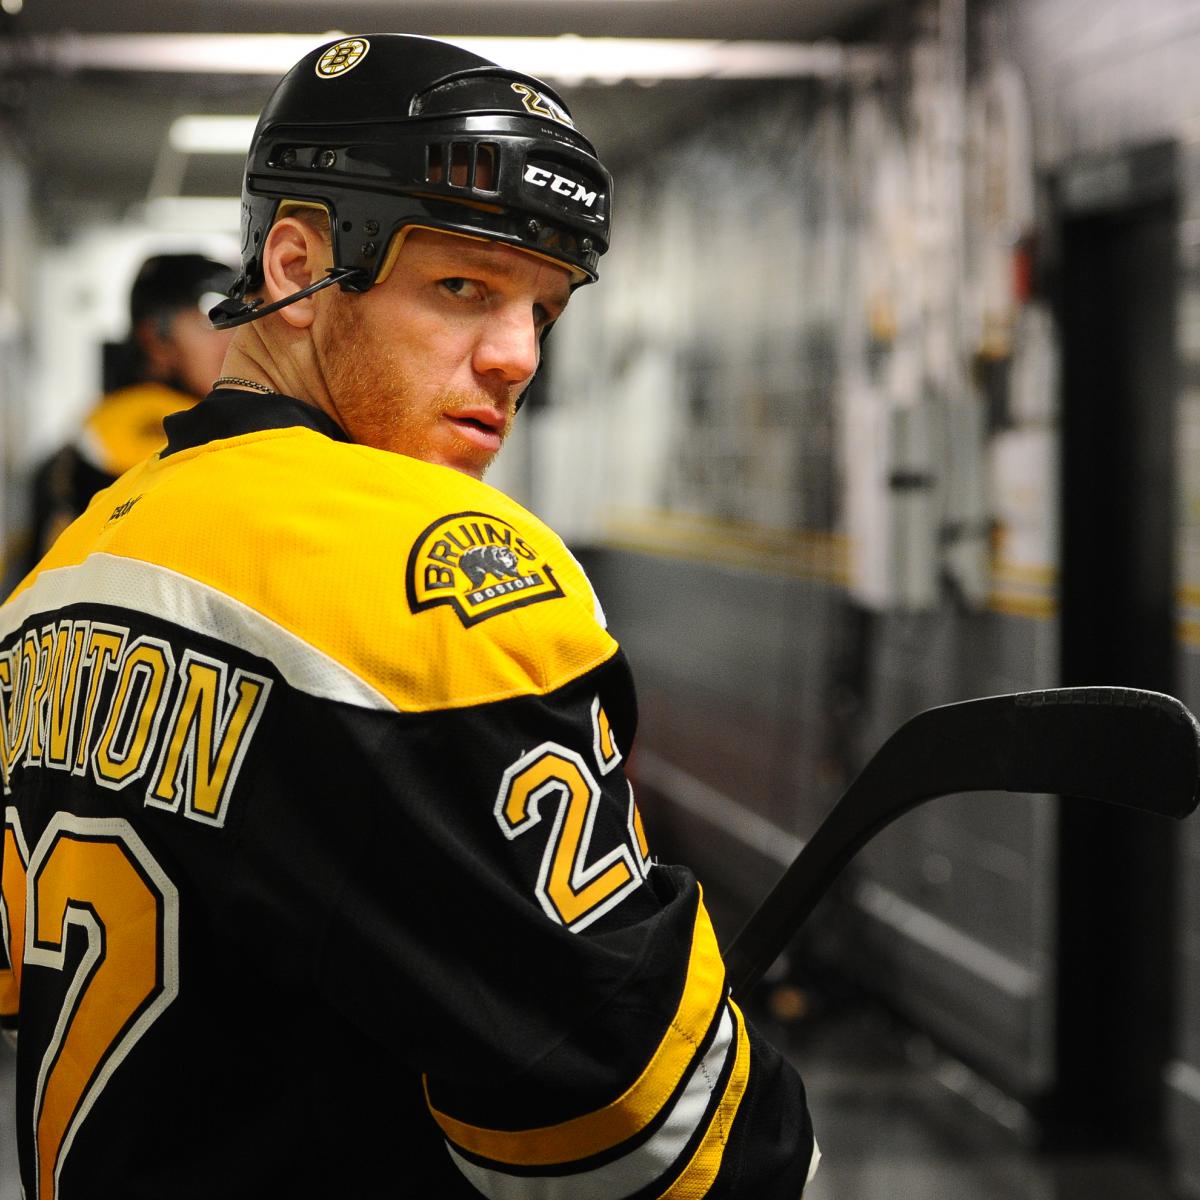 Force Factor Signs Endorsement Deal with Boston Bruins' Shawn